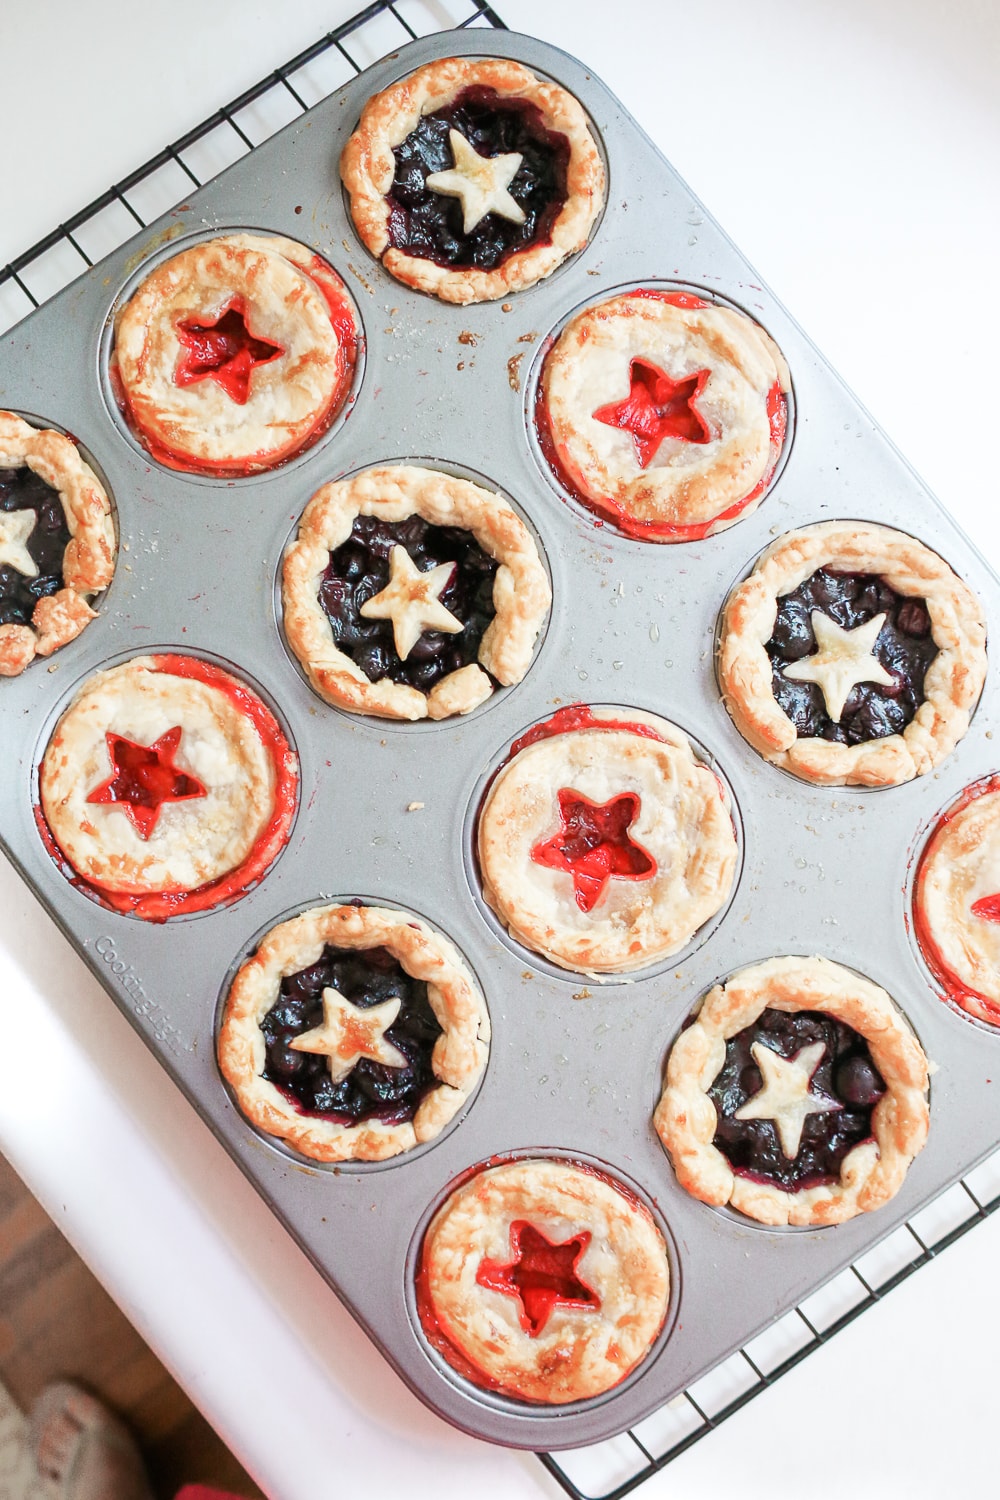 Blogger Stephanie Ziajka shows how to make miniature strawberry pies in a muffin tin on Diary of a Debutante